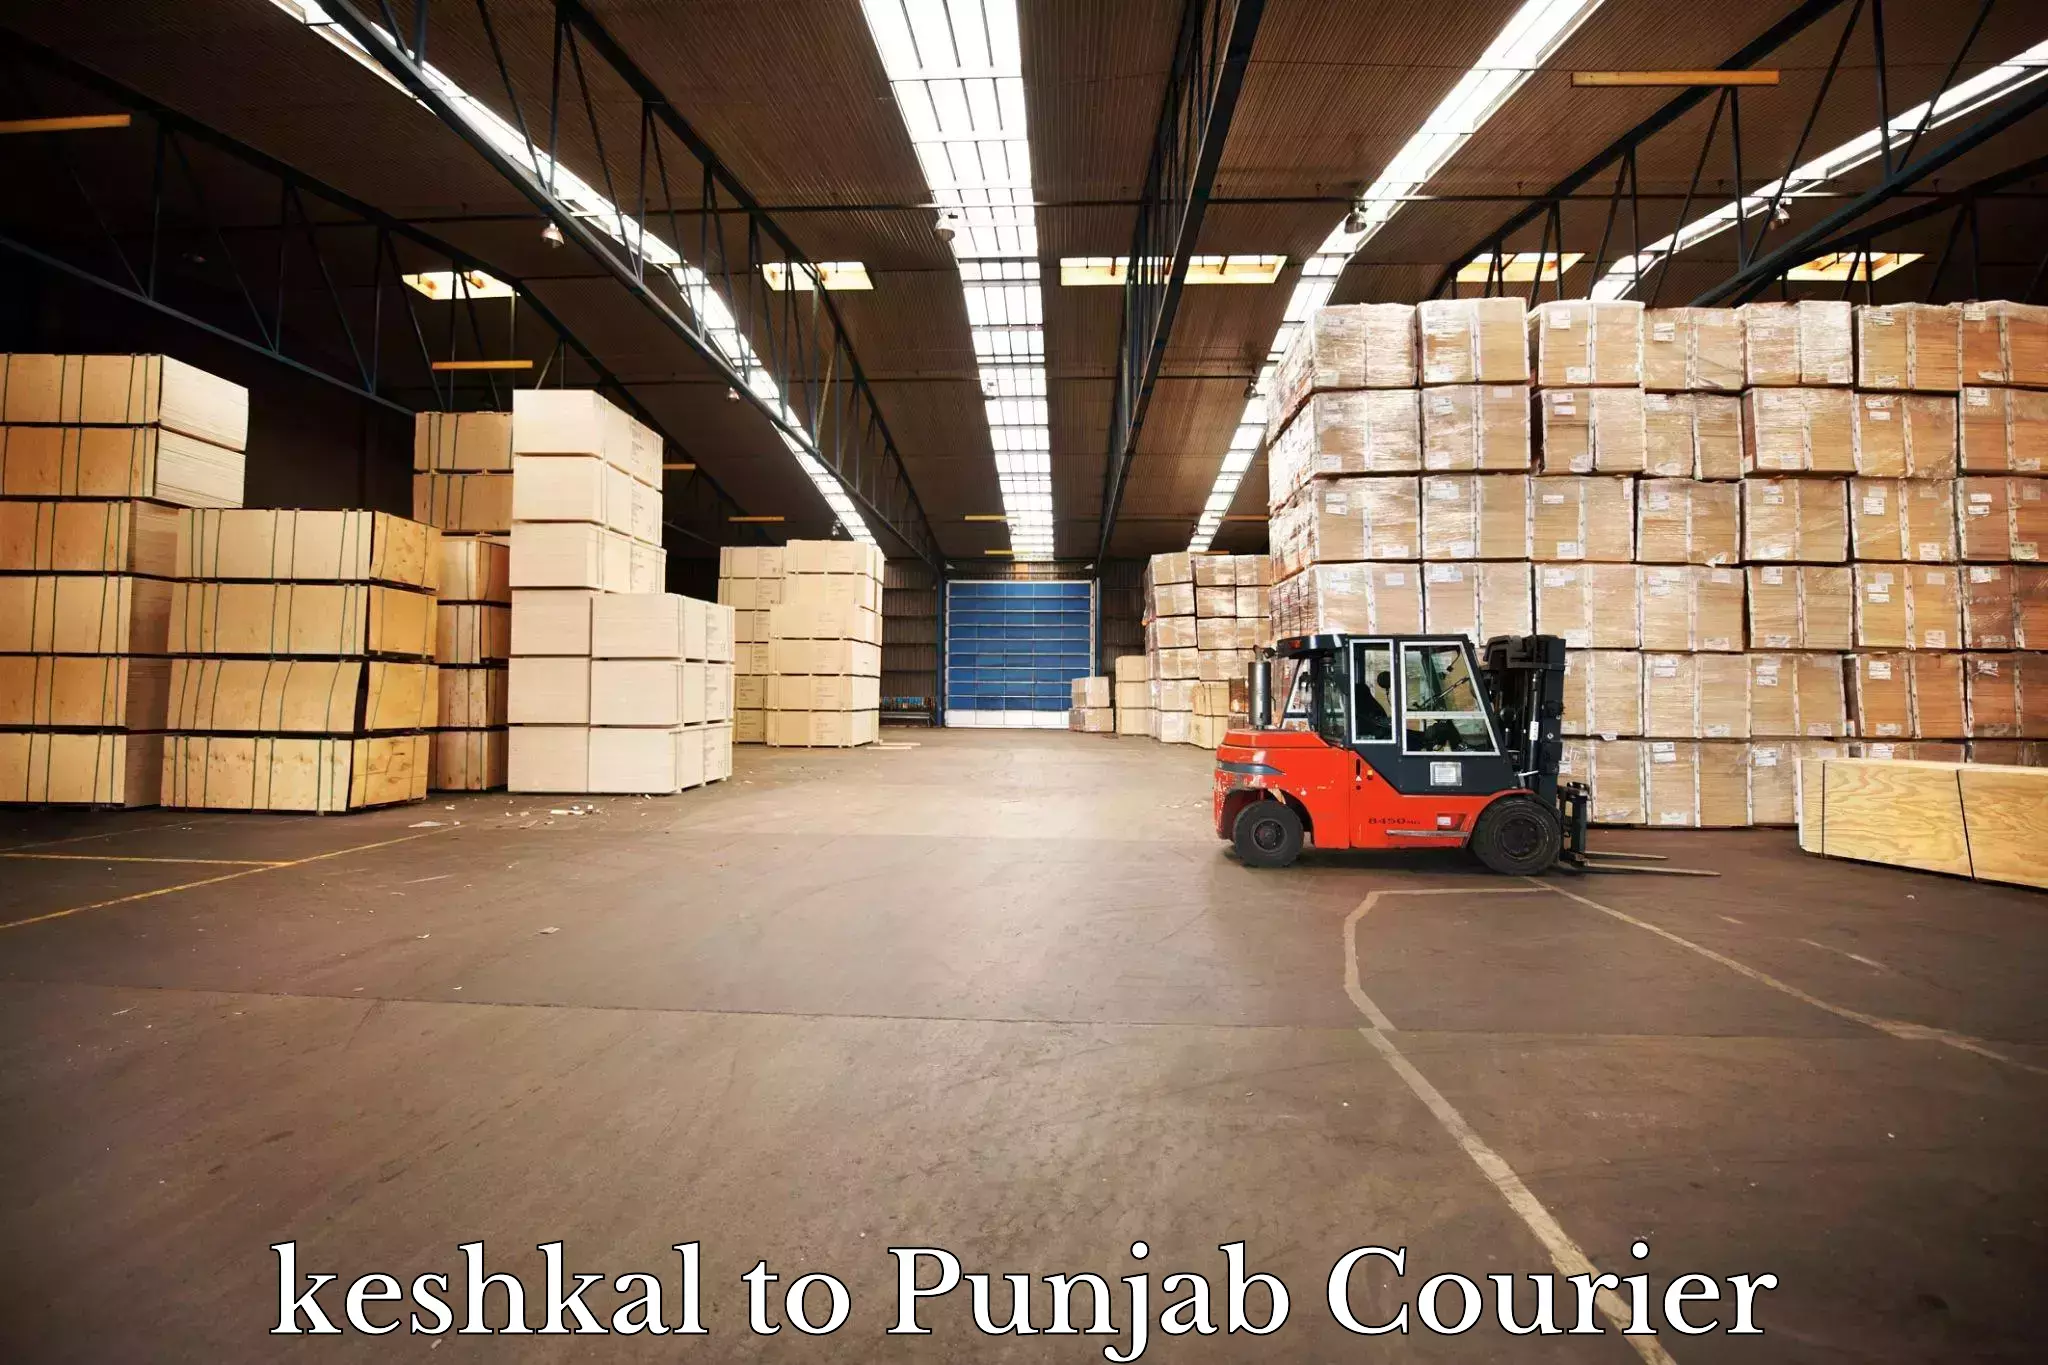 High-speed delivery keshkal to Sirhind Fatehgarh